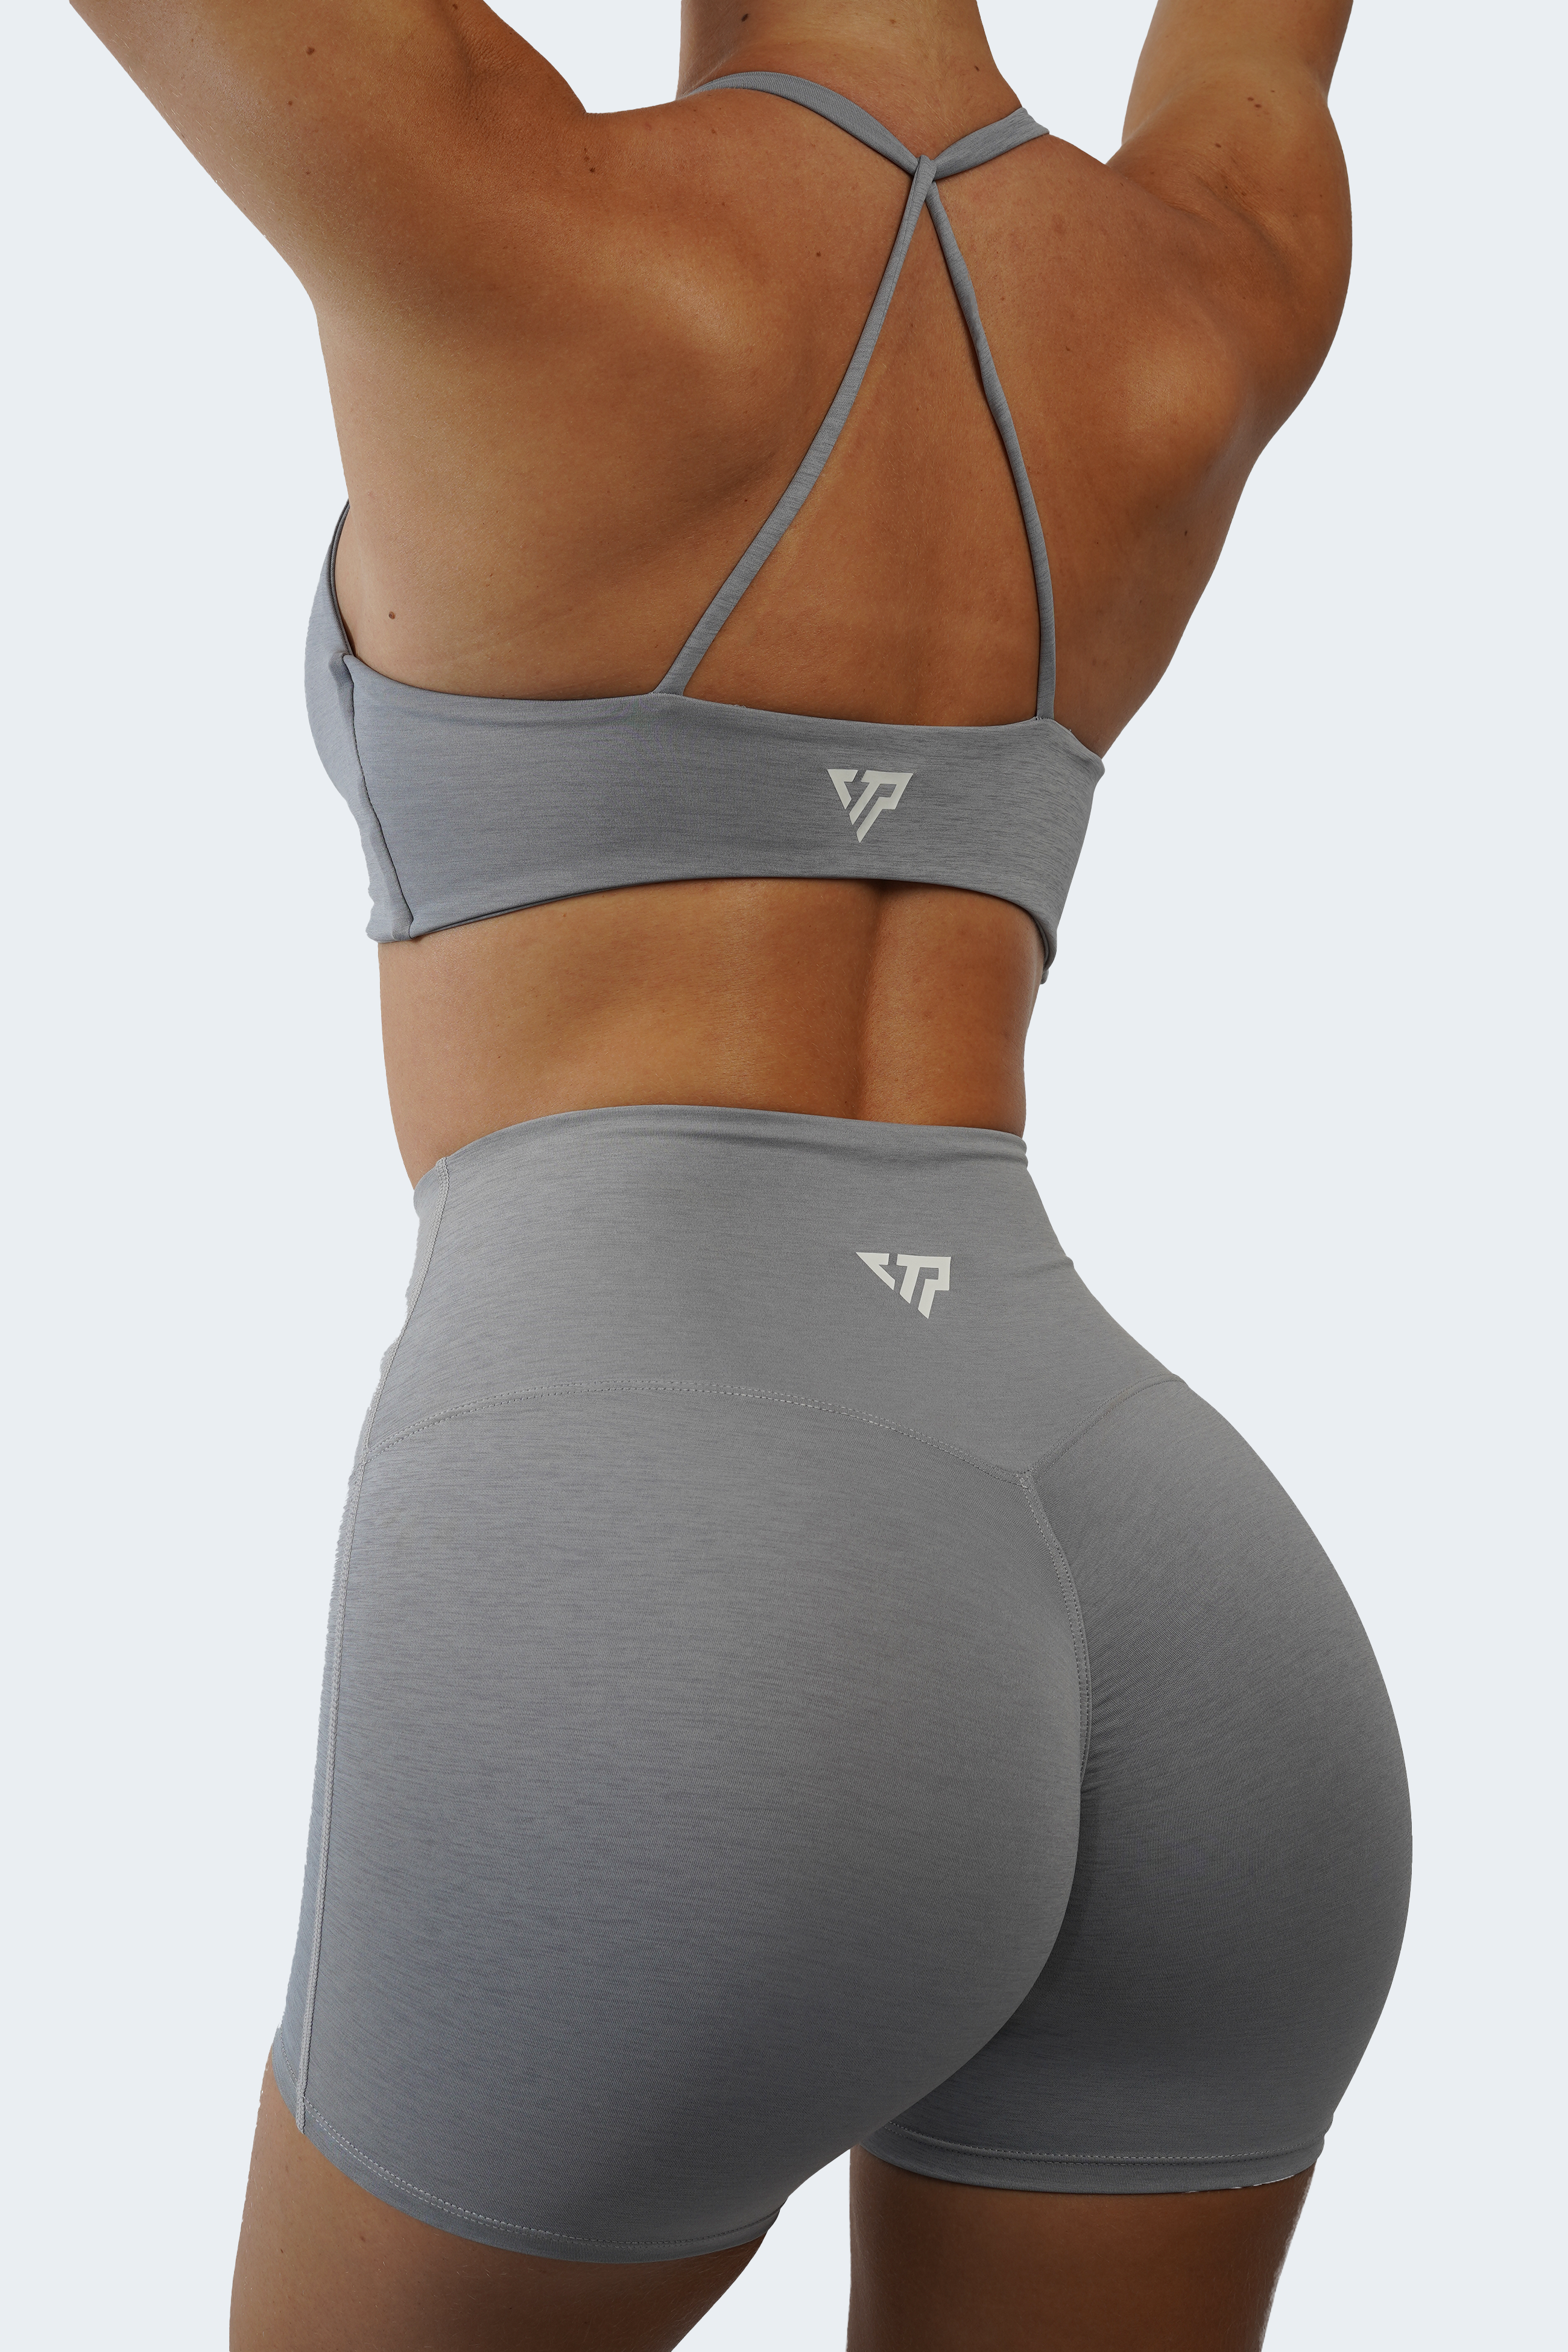 Inspire Crop - Marle Grey  The Perfect Twist Front Sports Bra